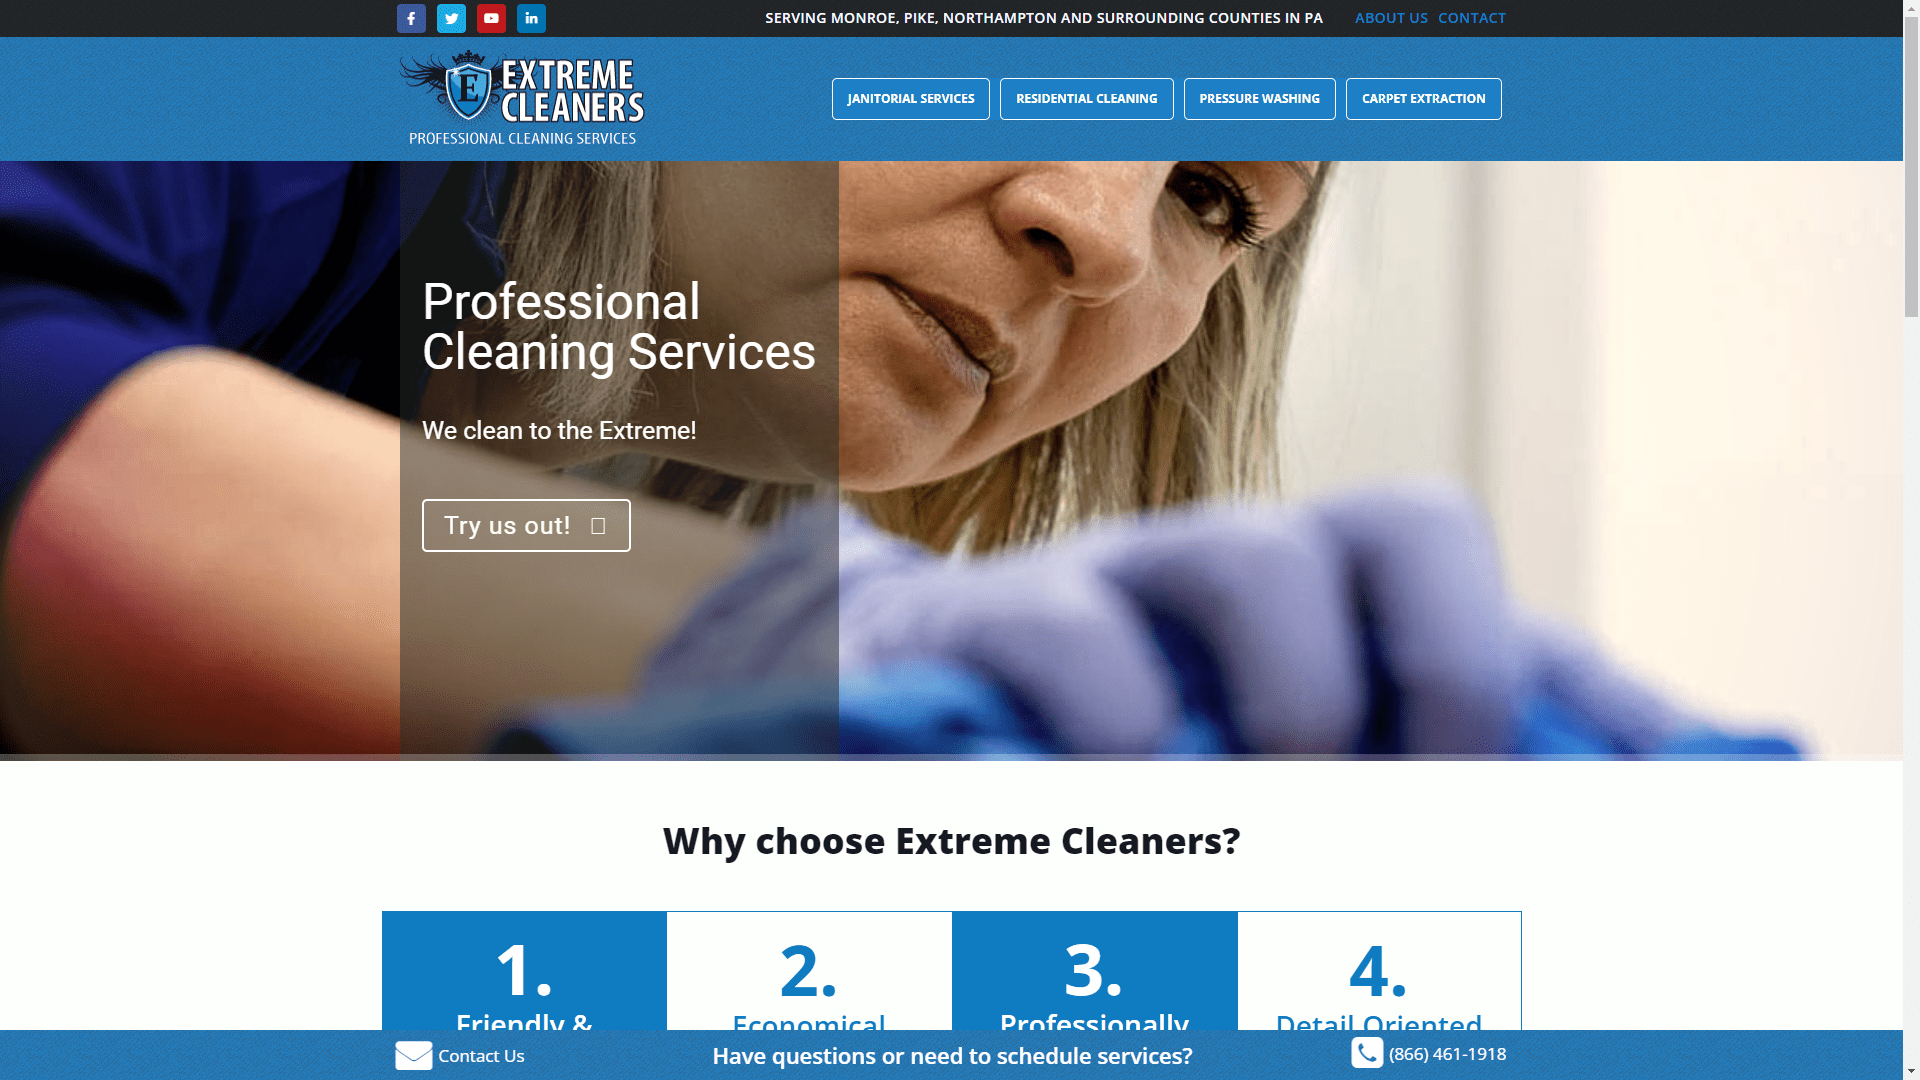 Extreme Cleaners